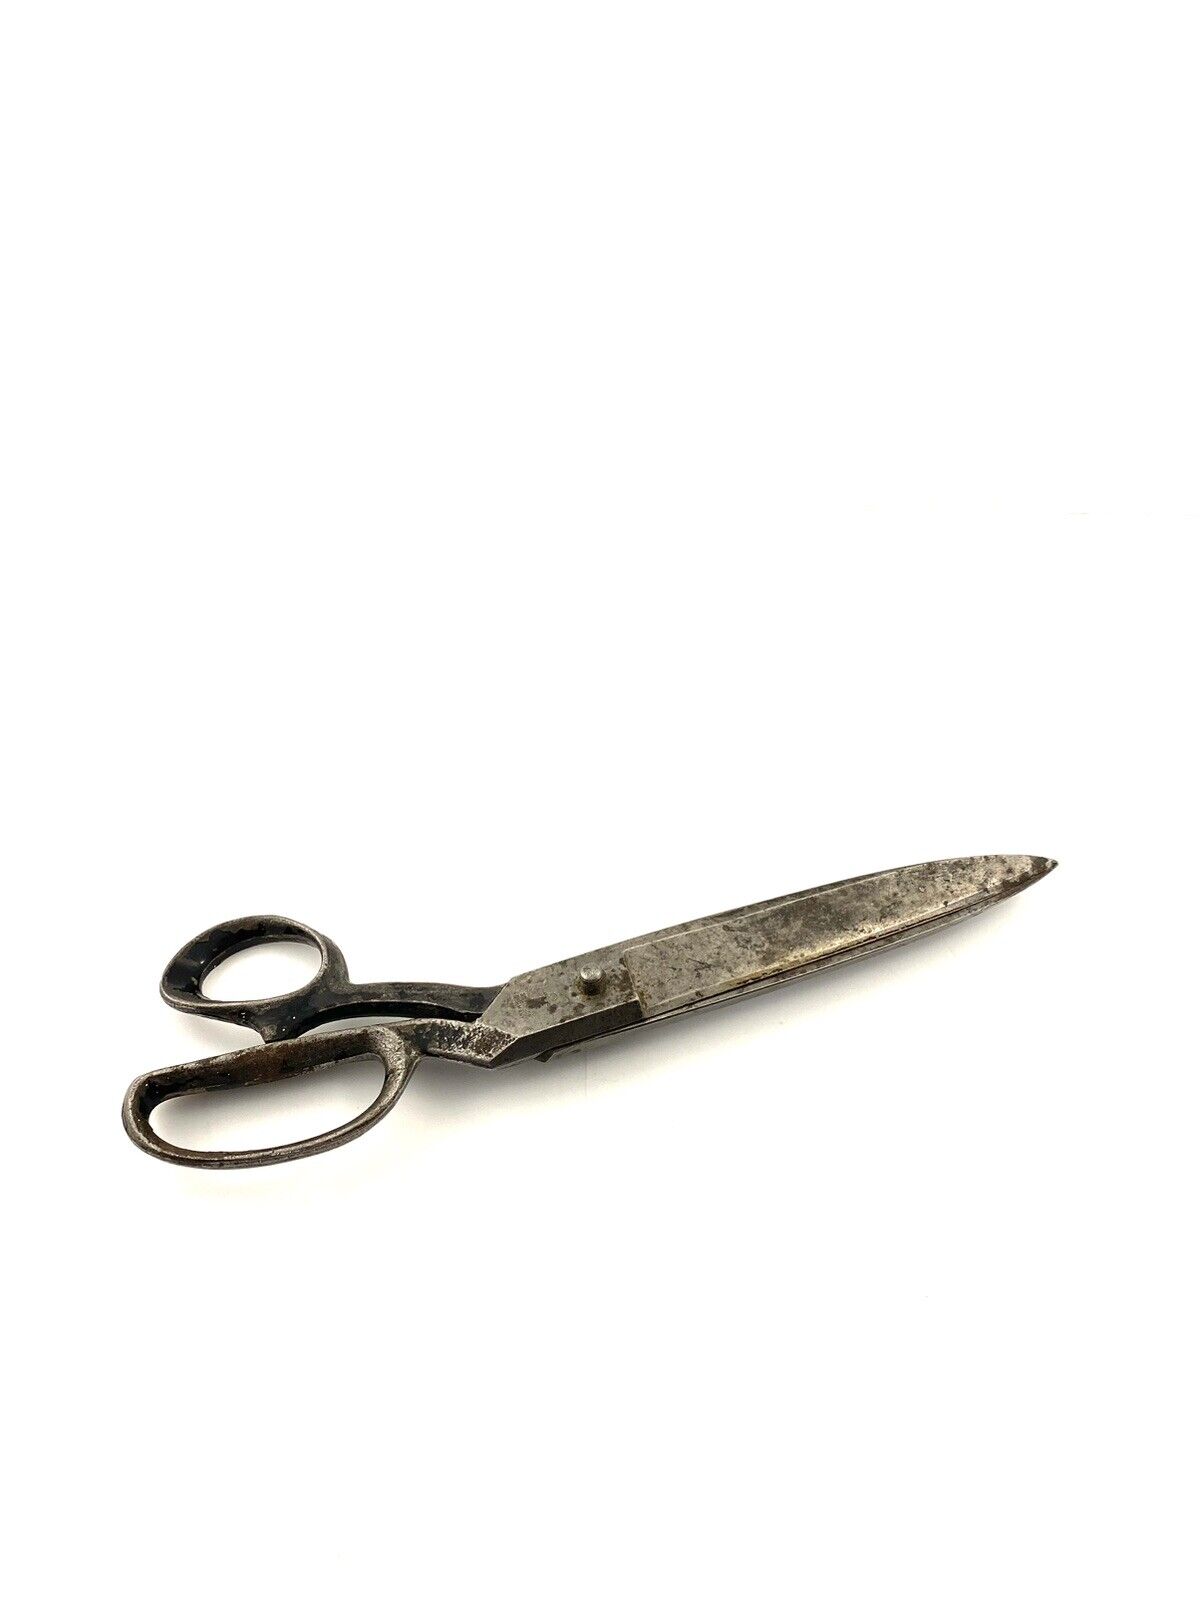 Antique Sewing tailor Scissors shears TAYLOR SOLINGEN Germany 1920's